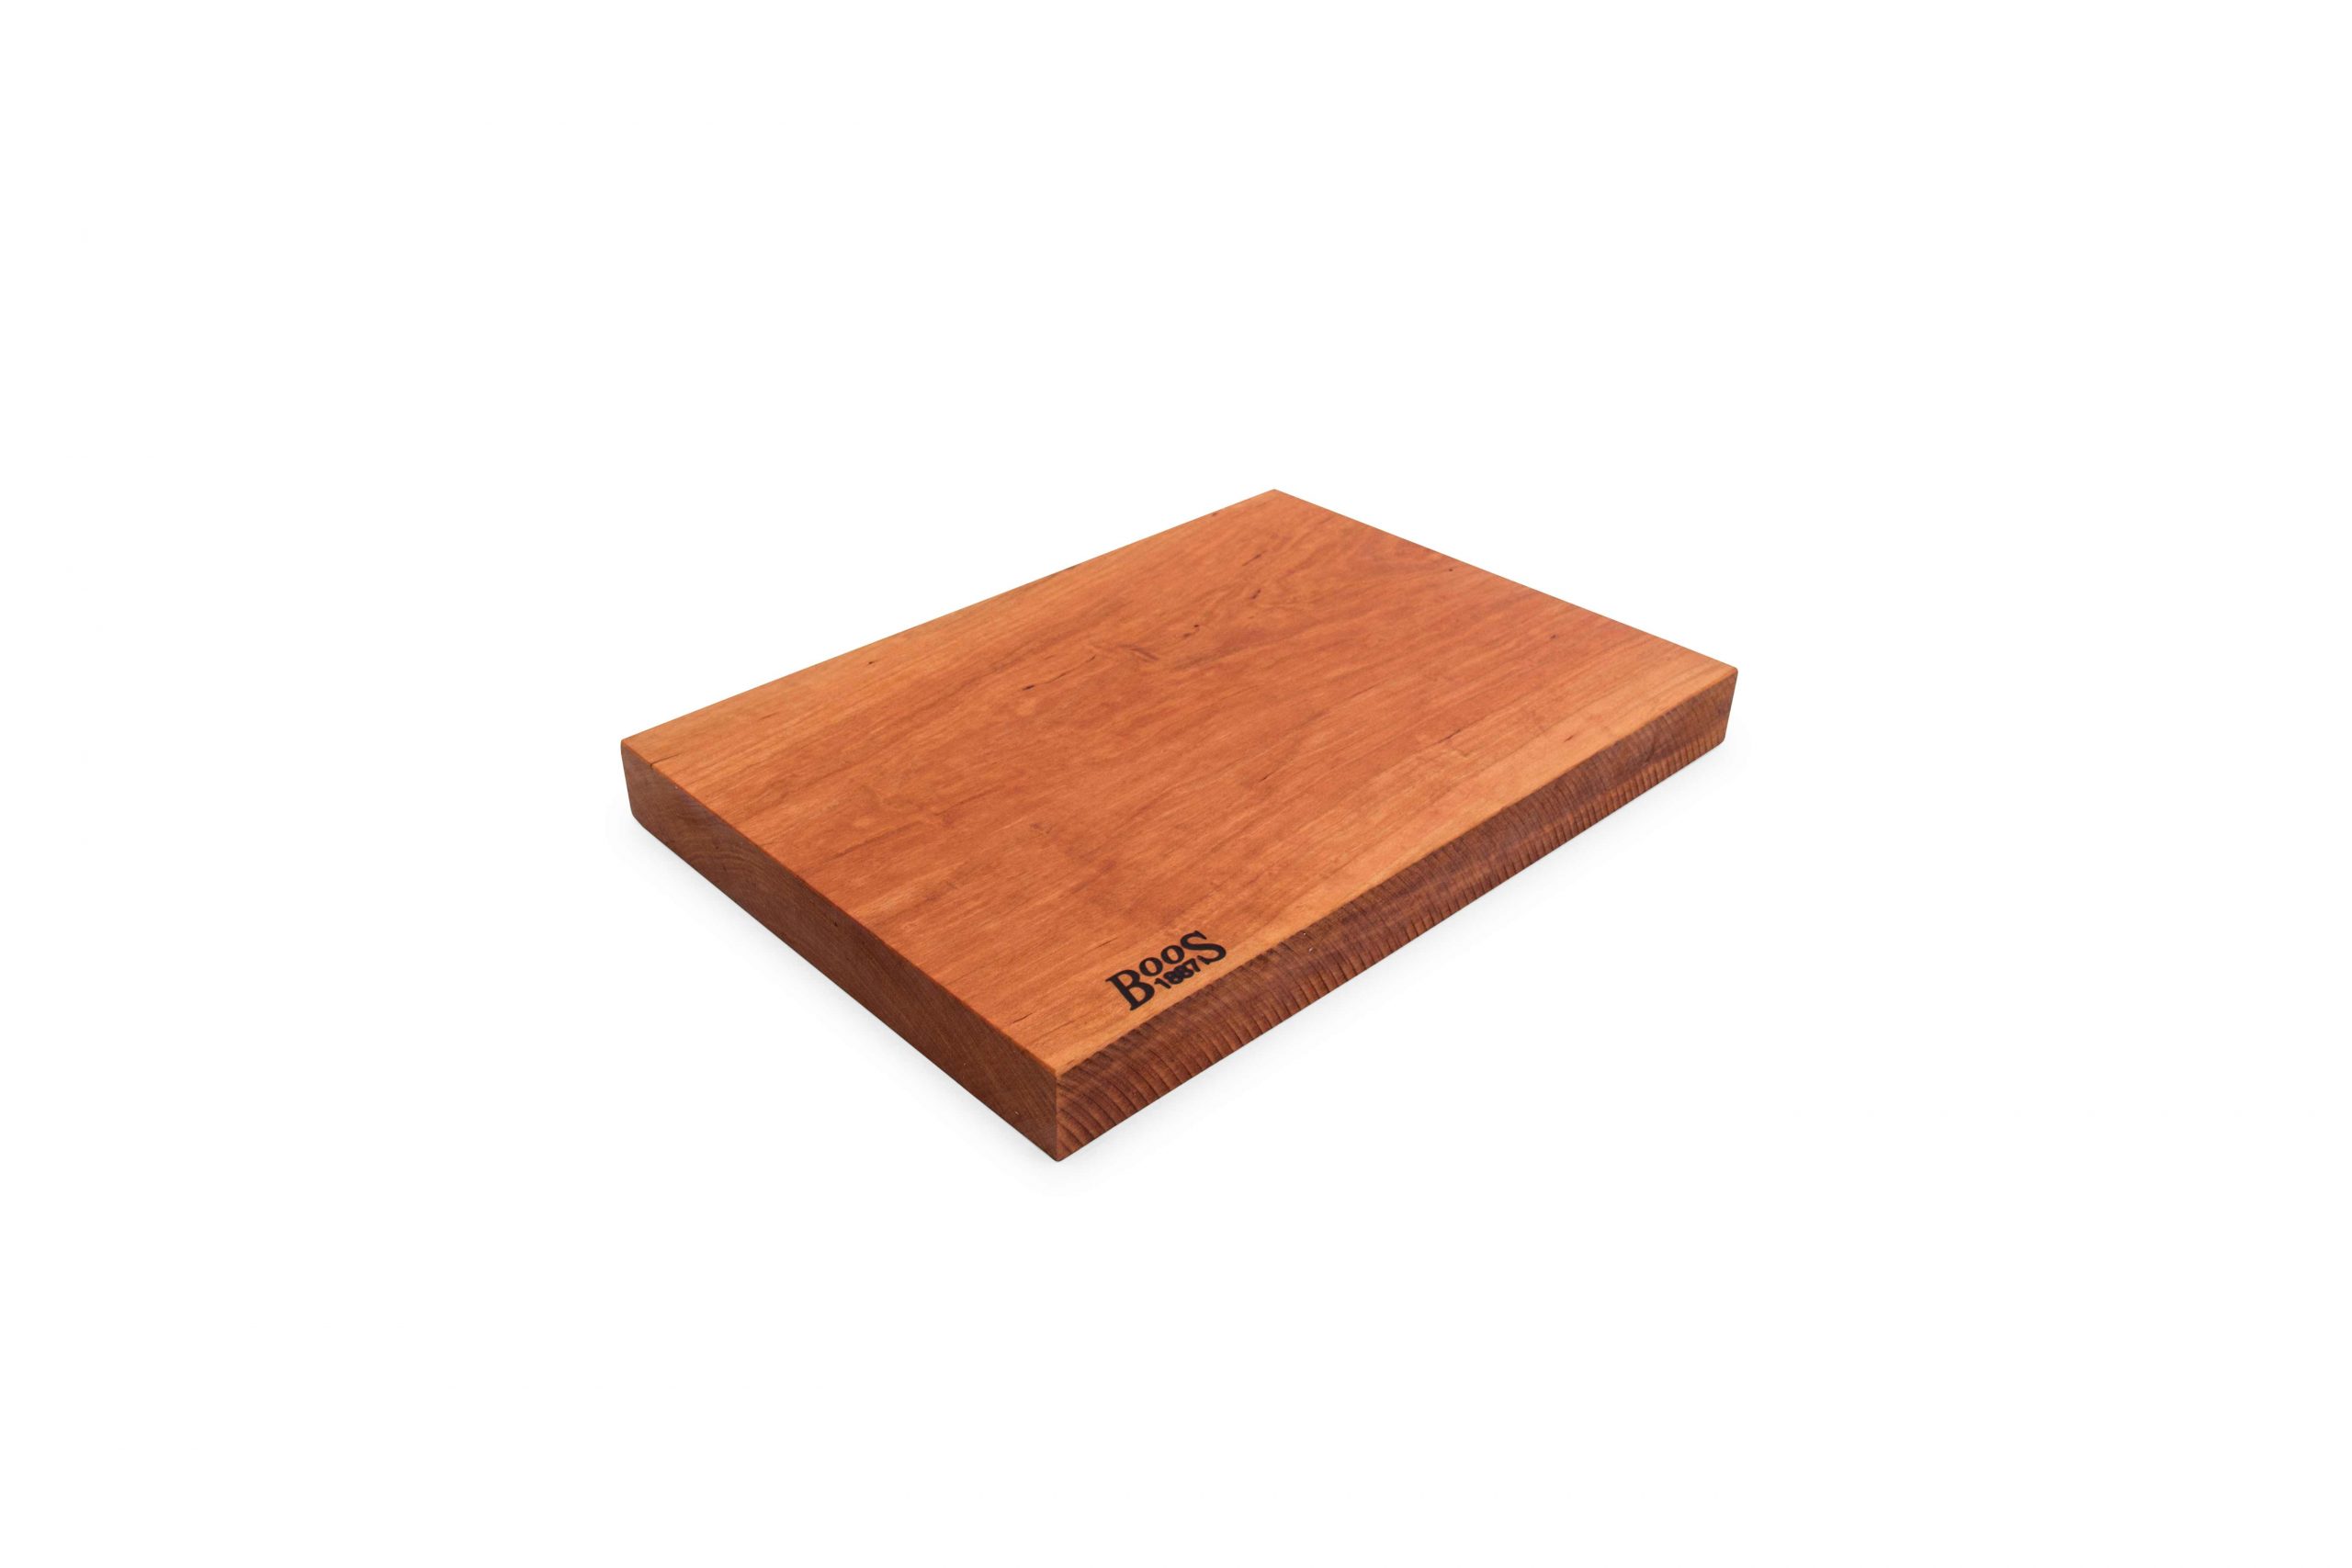 Boos 1887 / Rustic Edge one piece cutting board; American Cherry; can be used on both sides 1